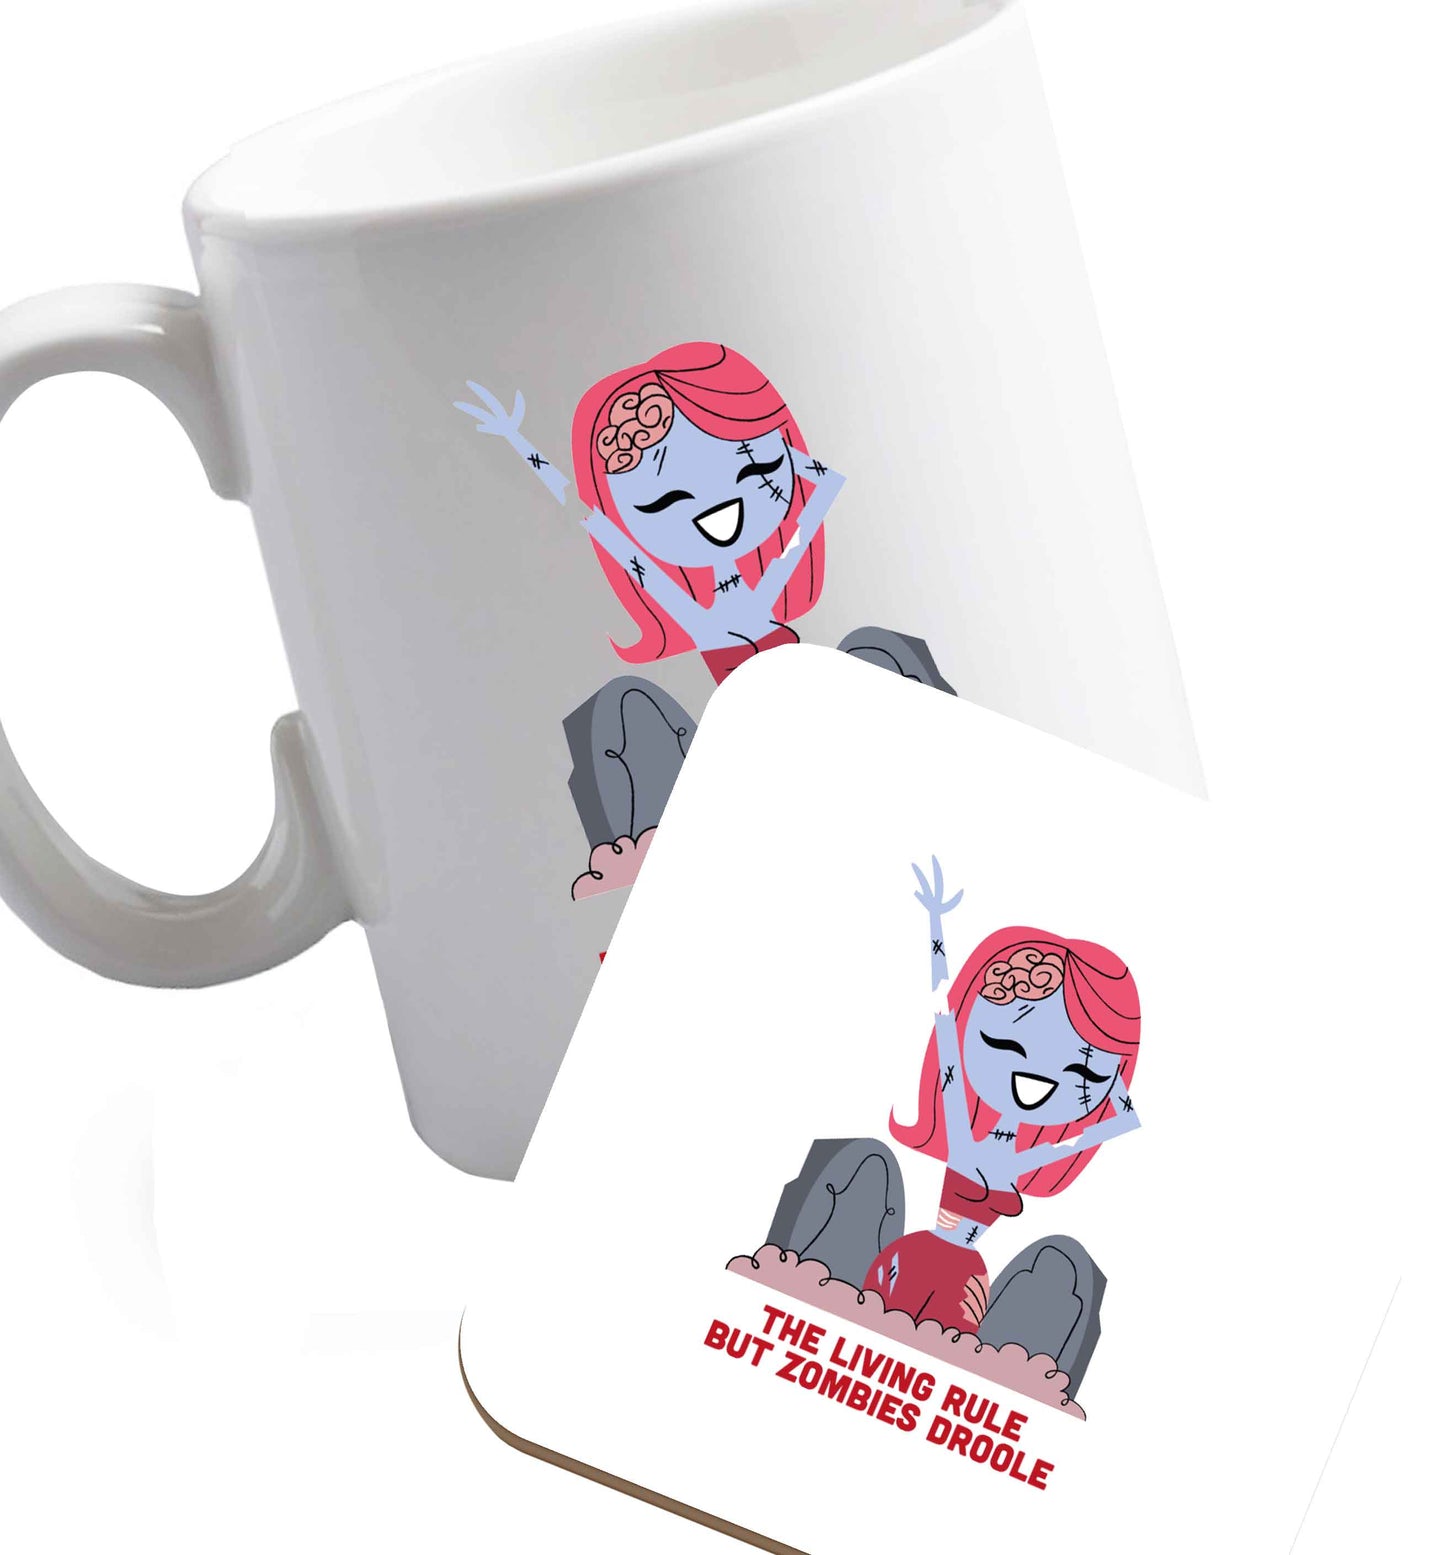 10 oz Living rule but zombies droole ceramic mug and coaster set right handed